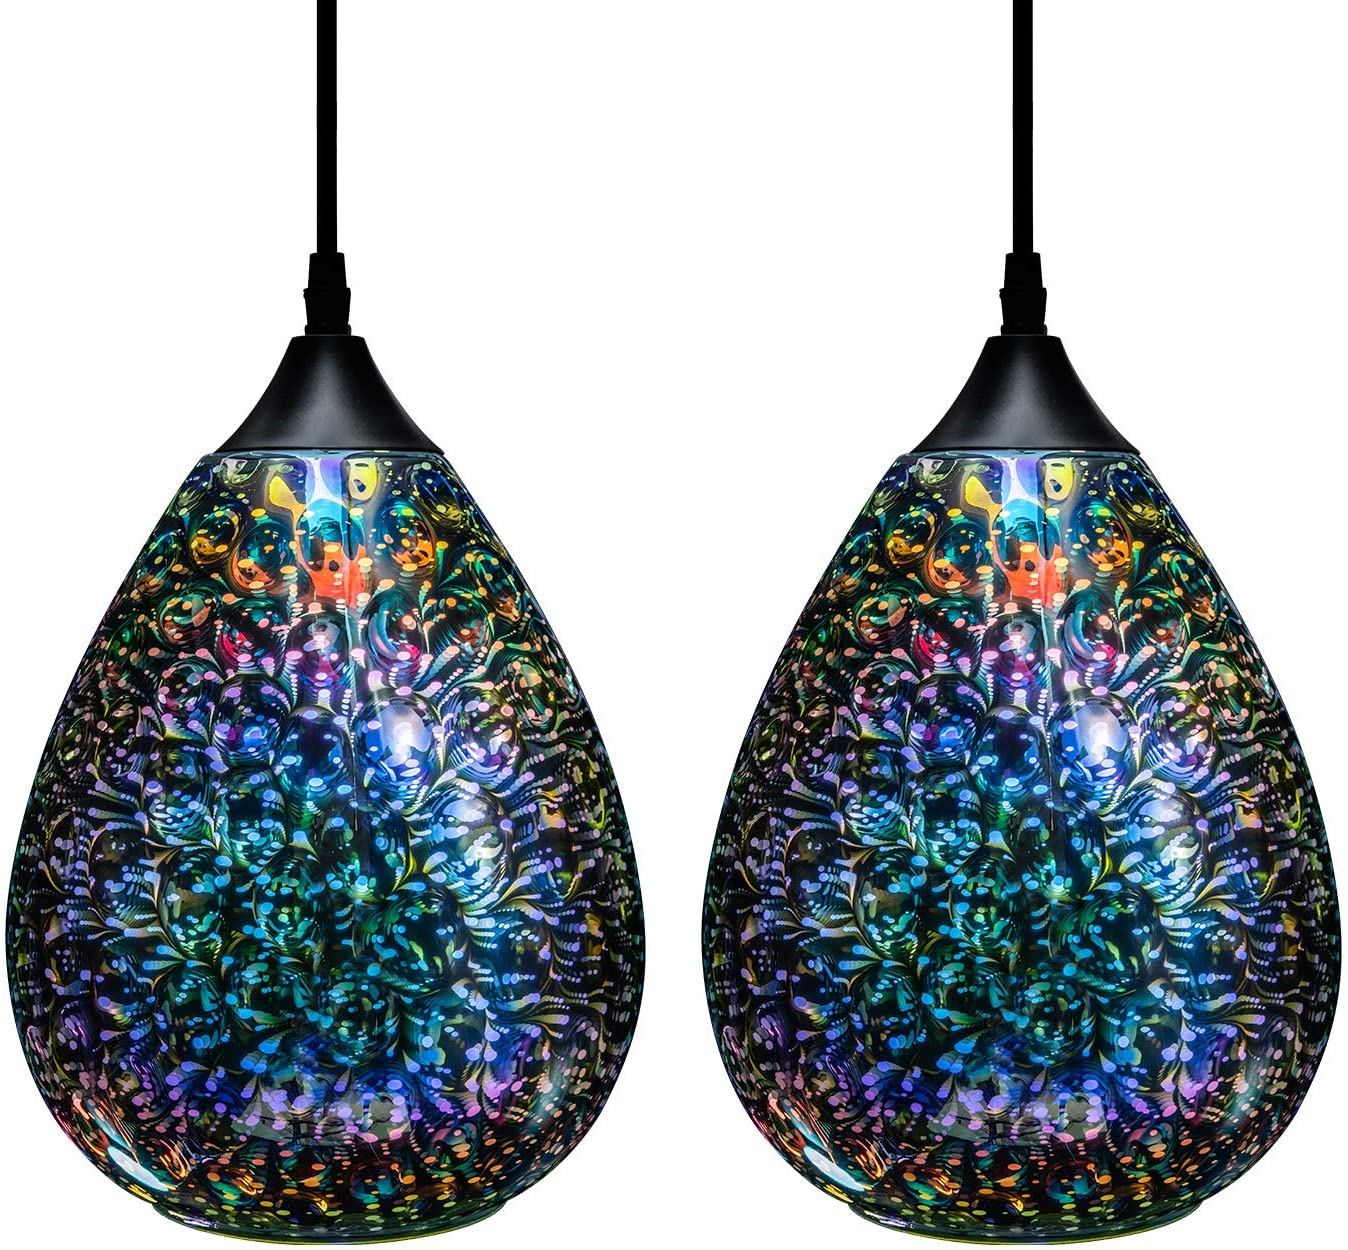 Yisuro Hammered Colored 3D-Glass Pendant Lighting, 2-Pack